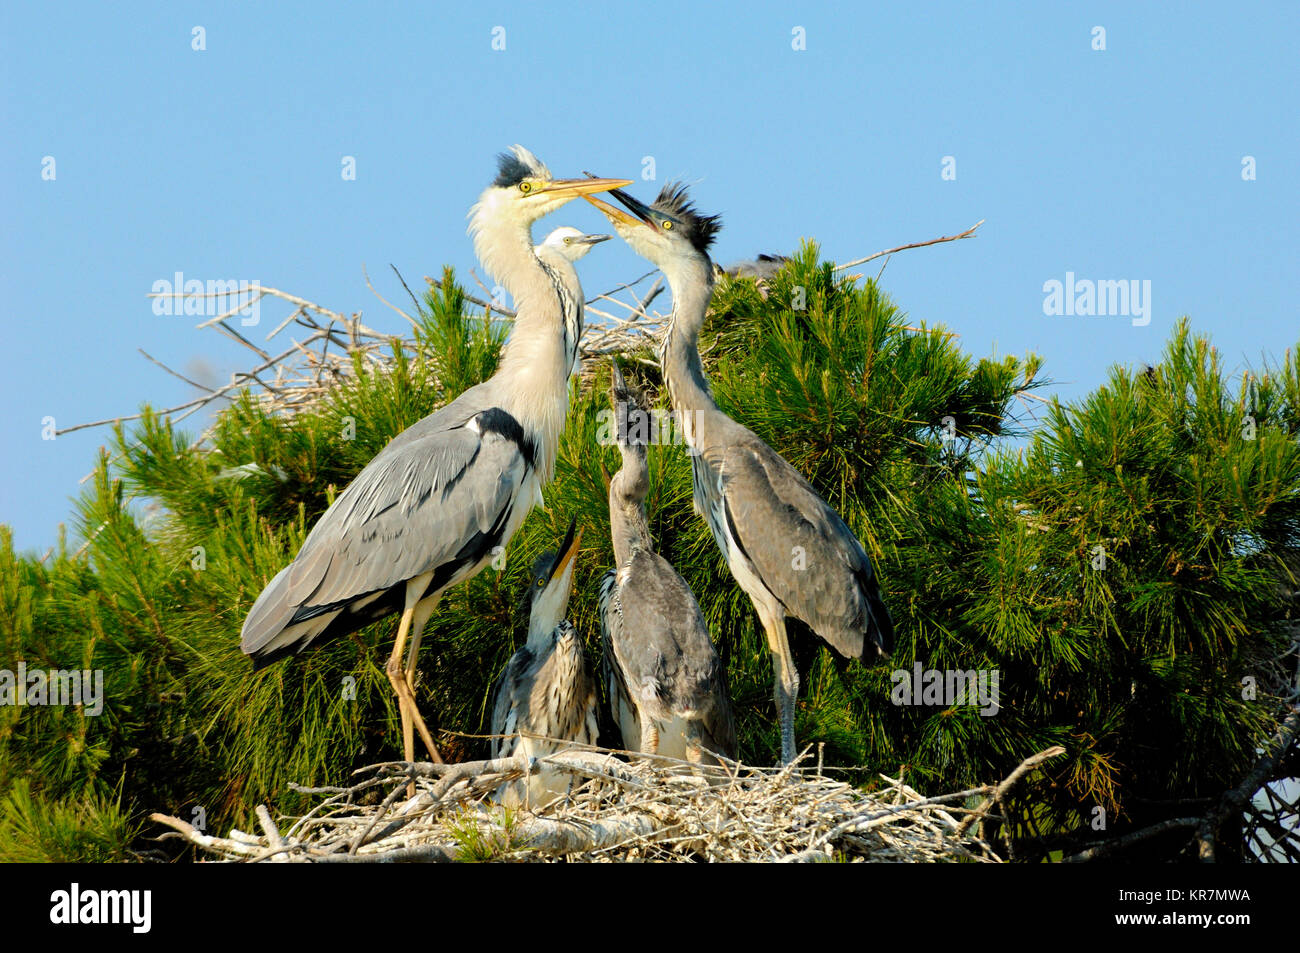 Pair of Adult Grey Herons, Ardea cinerea, and Young or Fledglings on Nest, in a Heronry or Heron Rookery, Camargue Wetlands, Provence, France Stock Photo